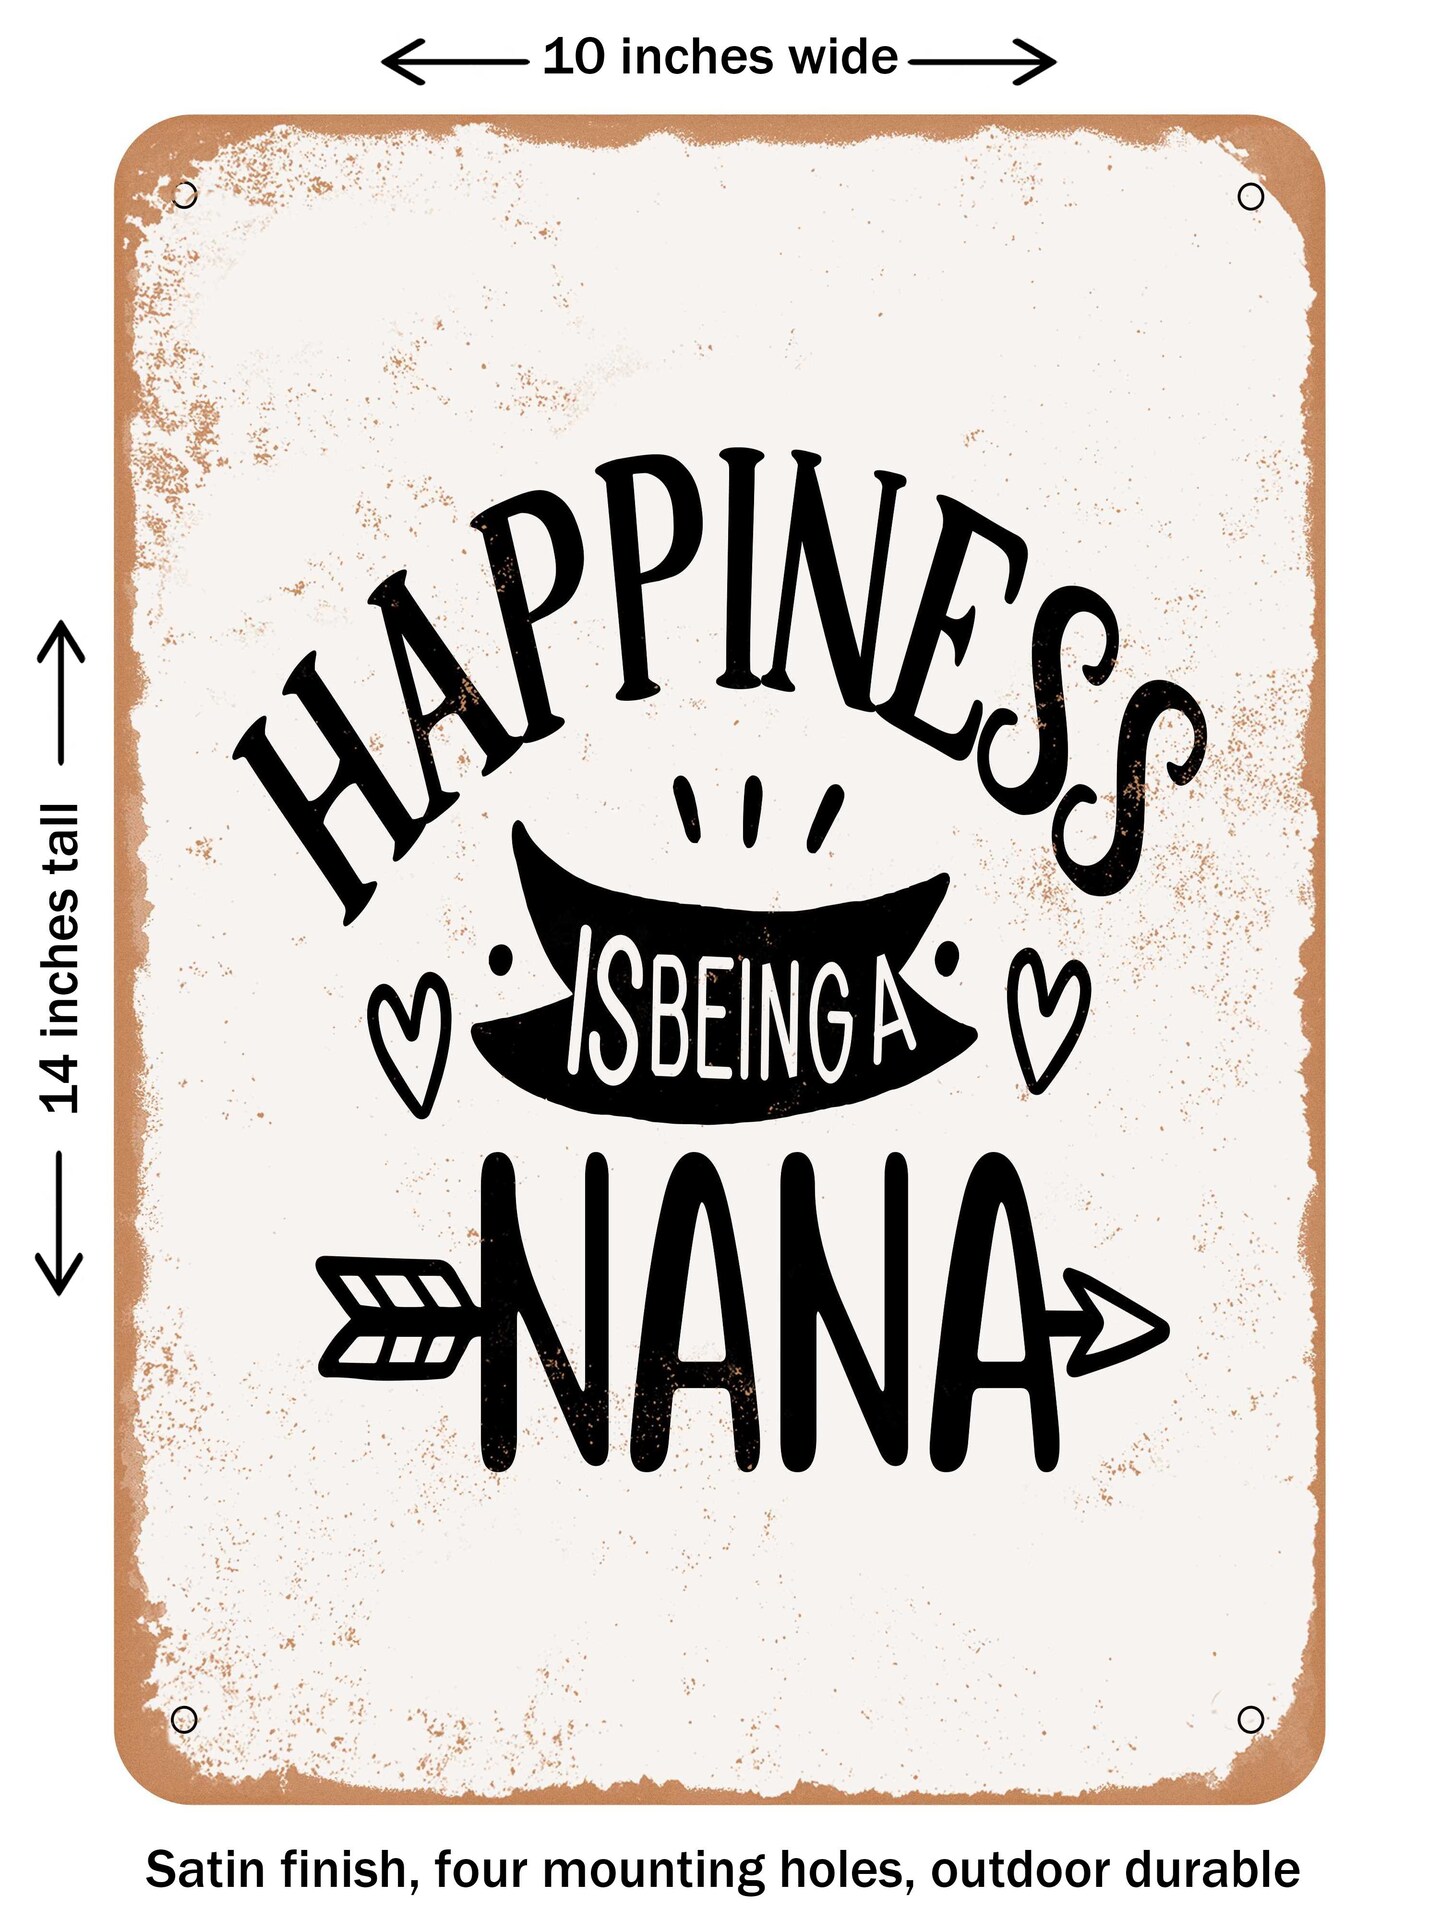 DECORATIVE METAL SIGN - Happiness is Being a Nana  - Vintage Rusty Look